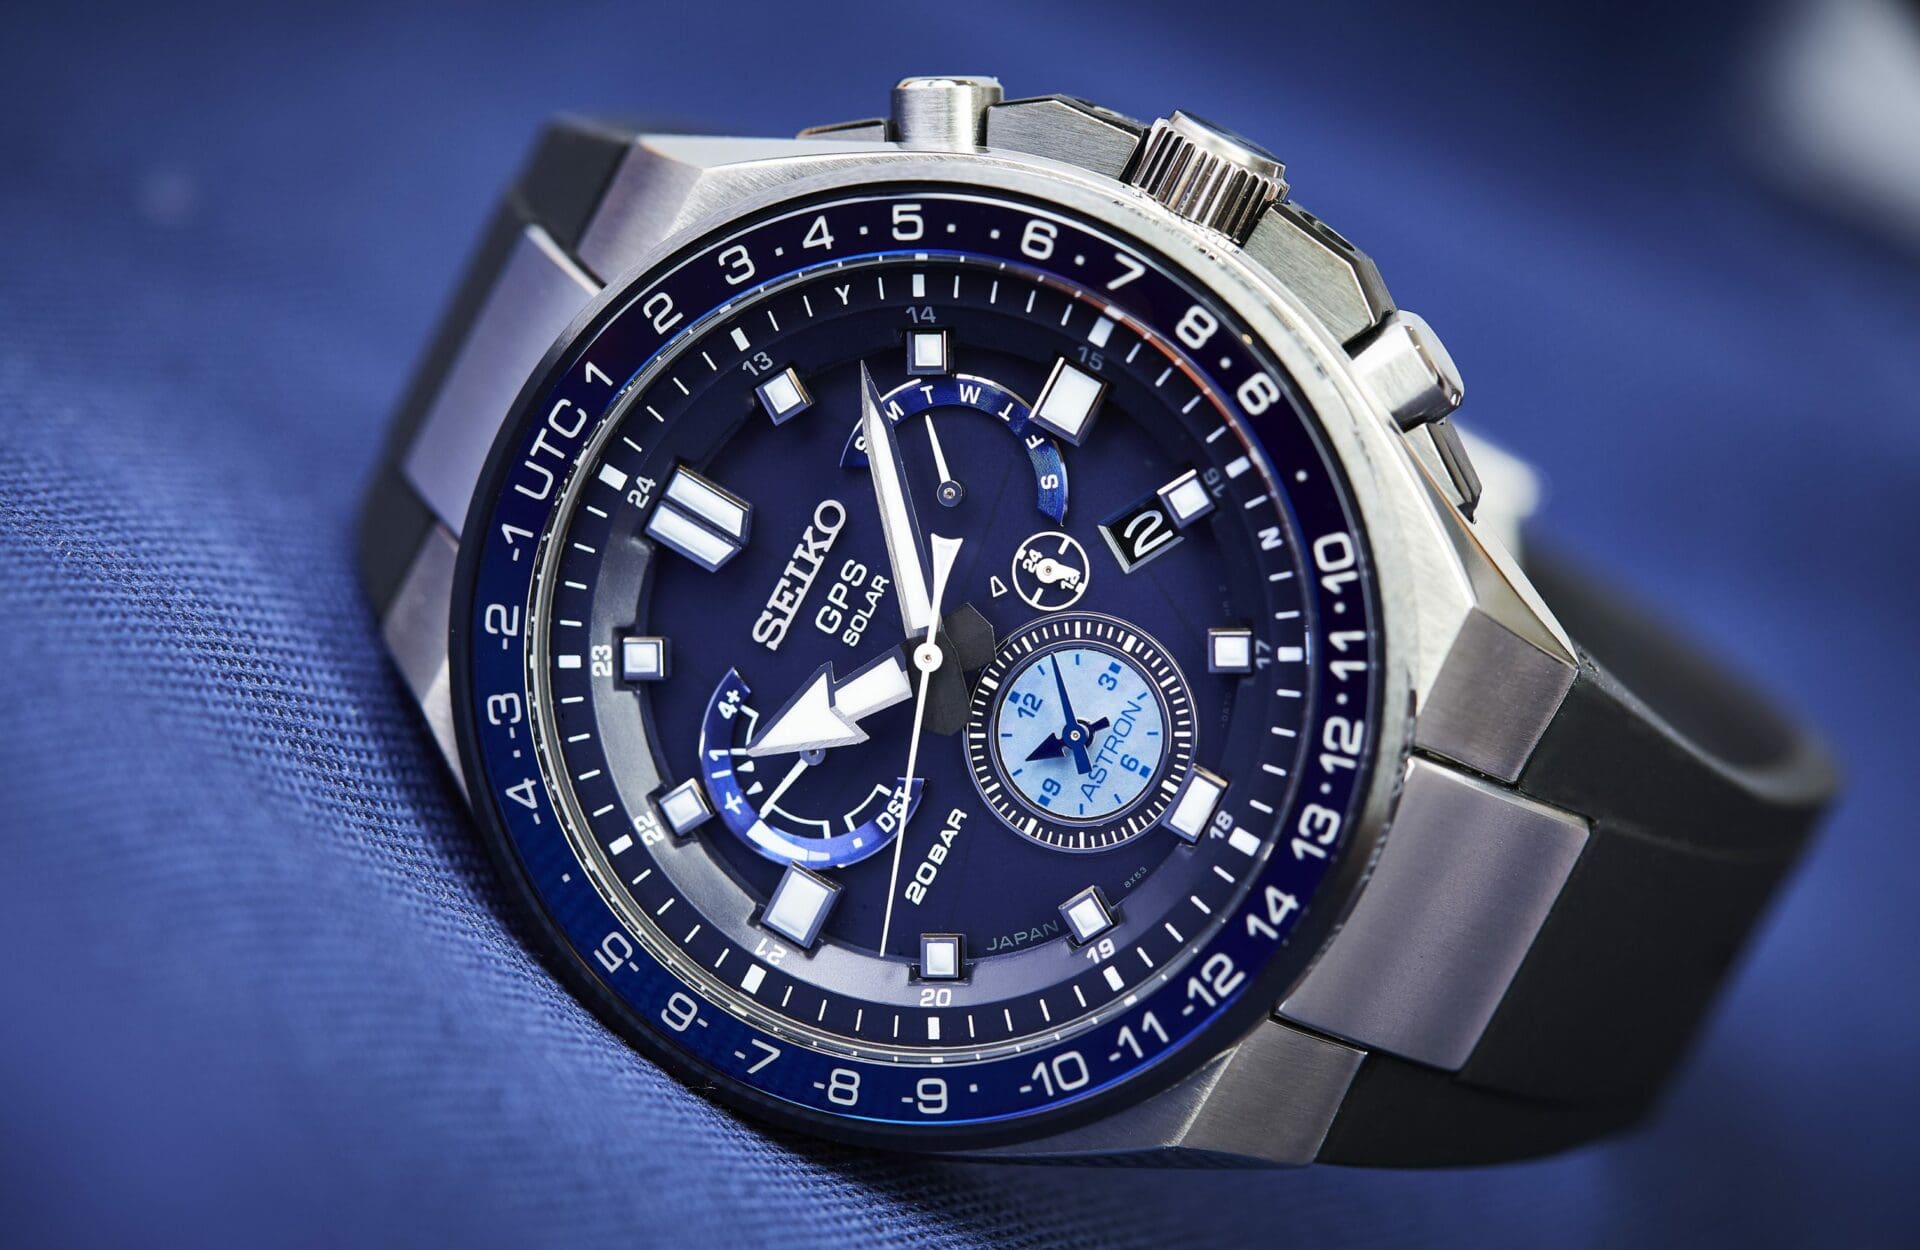 Solar flair: Which Seiko Astron is right for you?